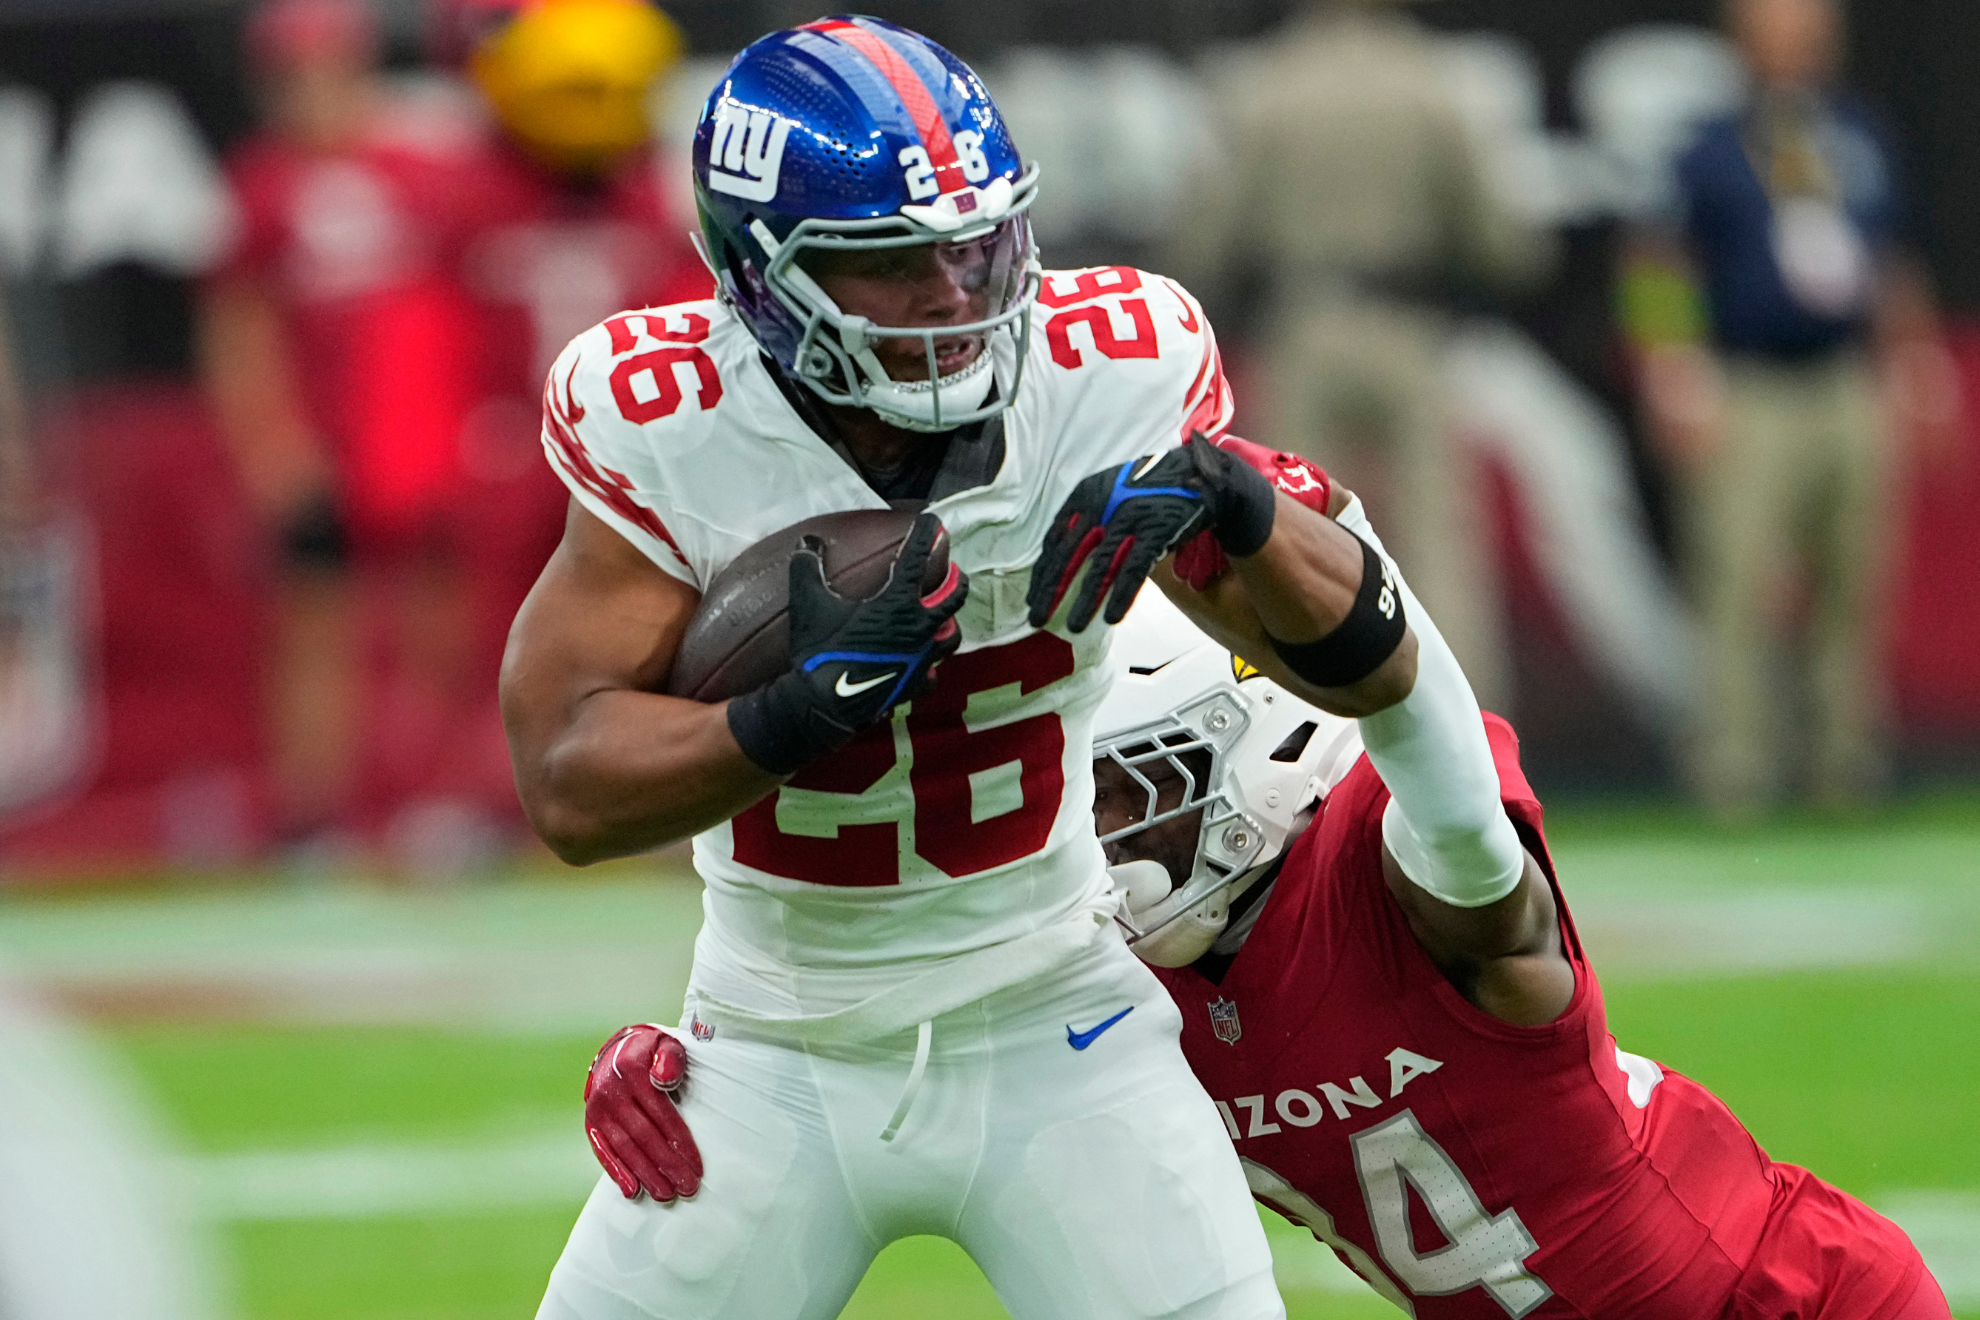 A Barkley injury would be bad news for the 1-1 Giants.